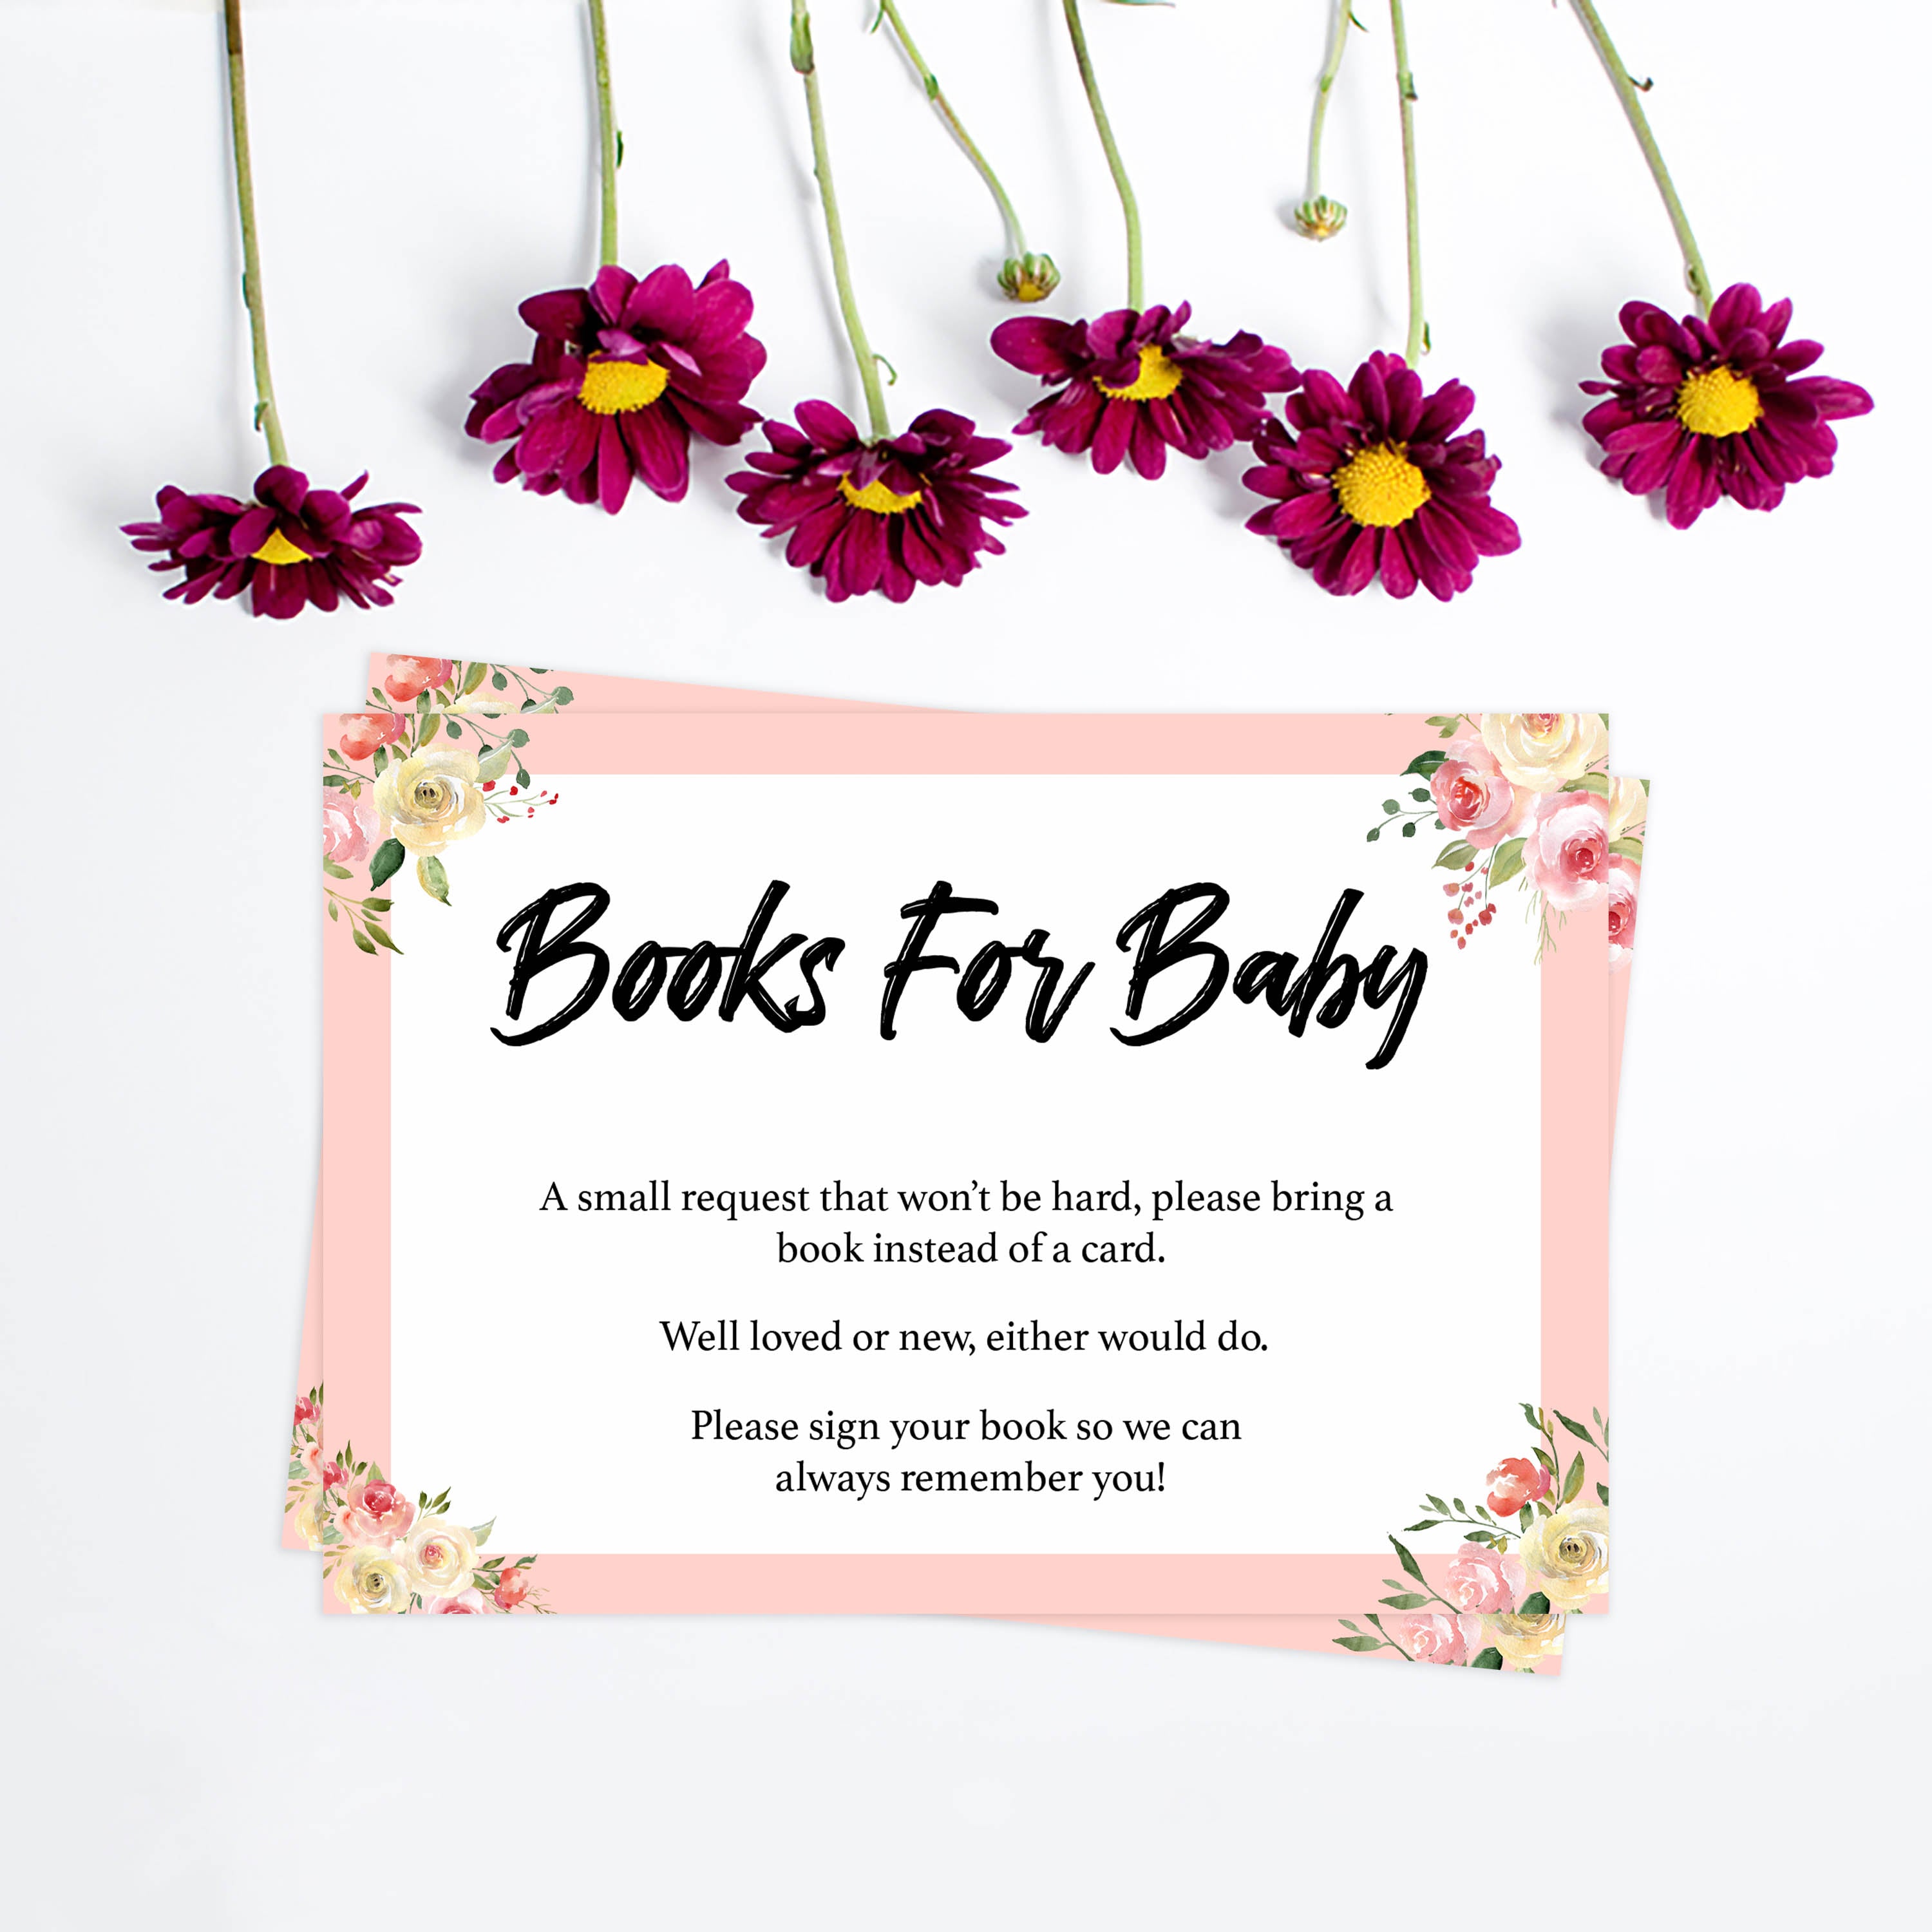 books for baby, bring a book, Printable baby shower games, floral fun baby games, baby shower games, fun baby shower ideas, top baby shower ideas, floral baby shower, blue baby shower ideas